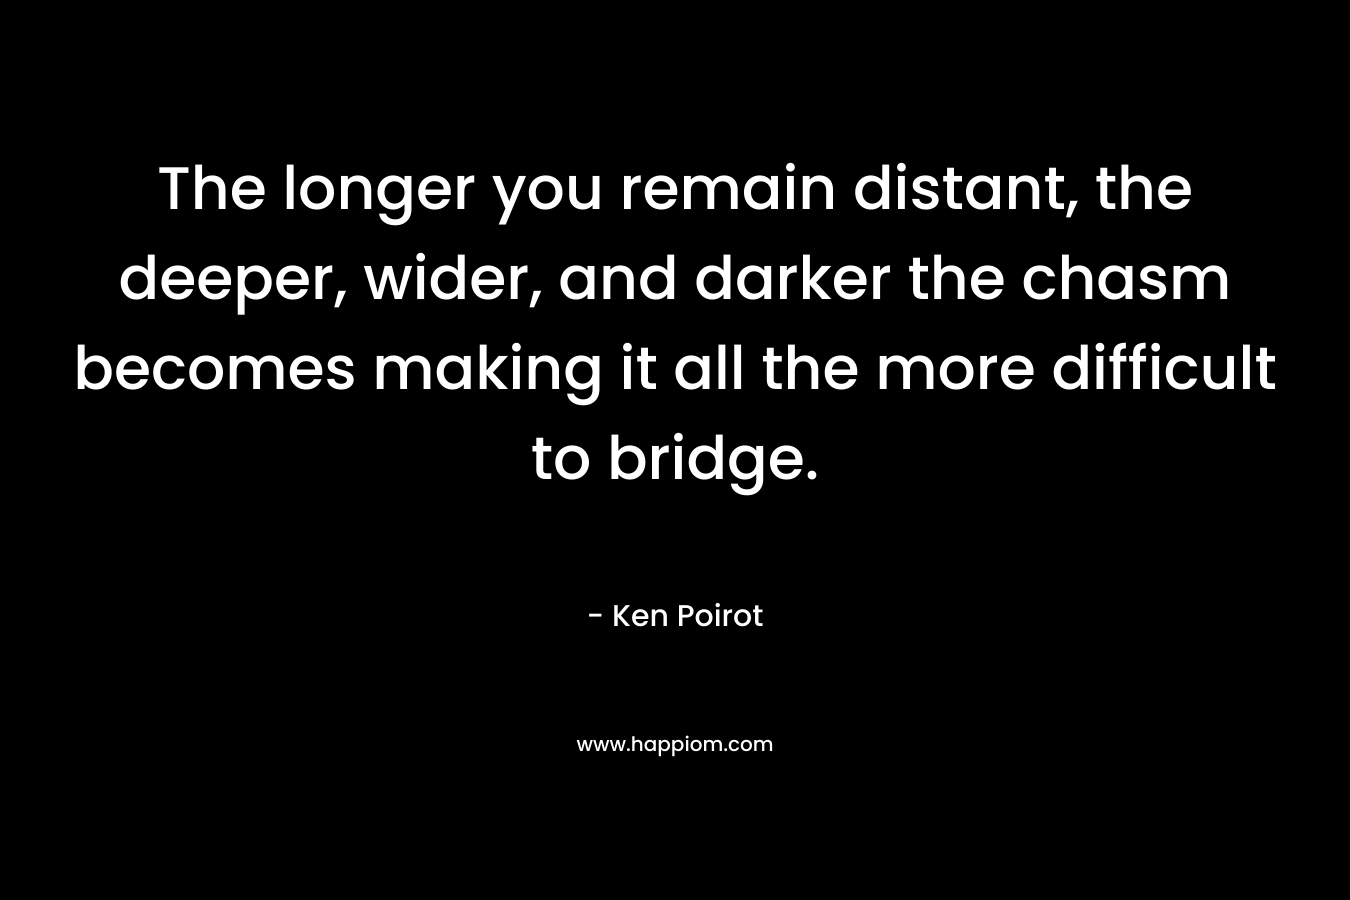 The longer you remain distant, the deeper, wider, and darker the chasm becomes making it all the more difficult to bridge. – Ken Poirot